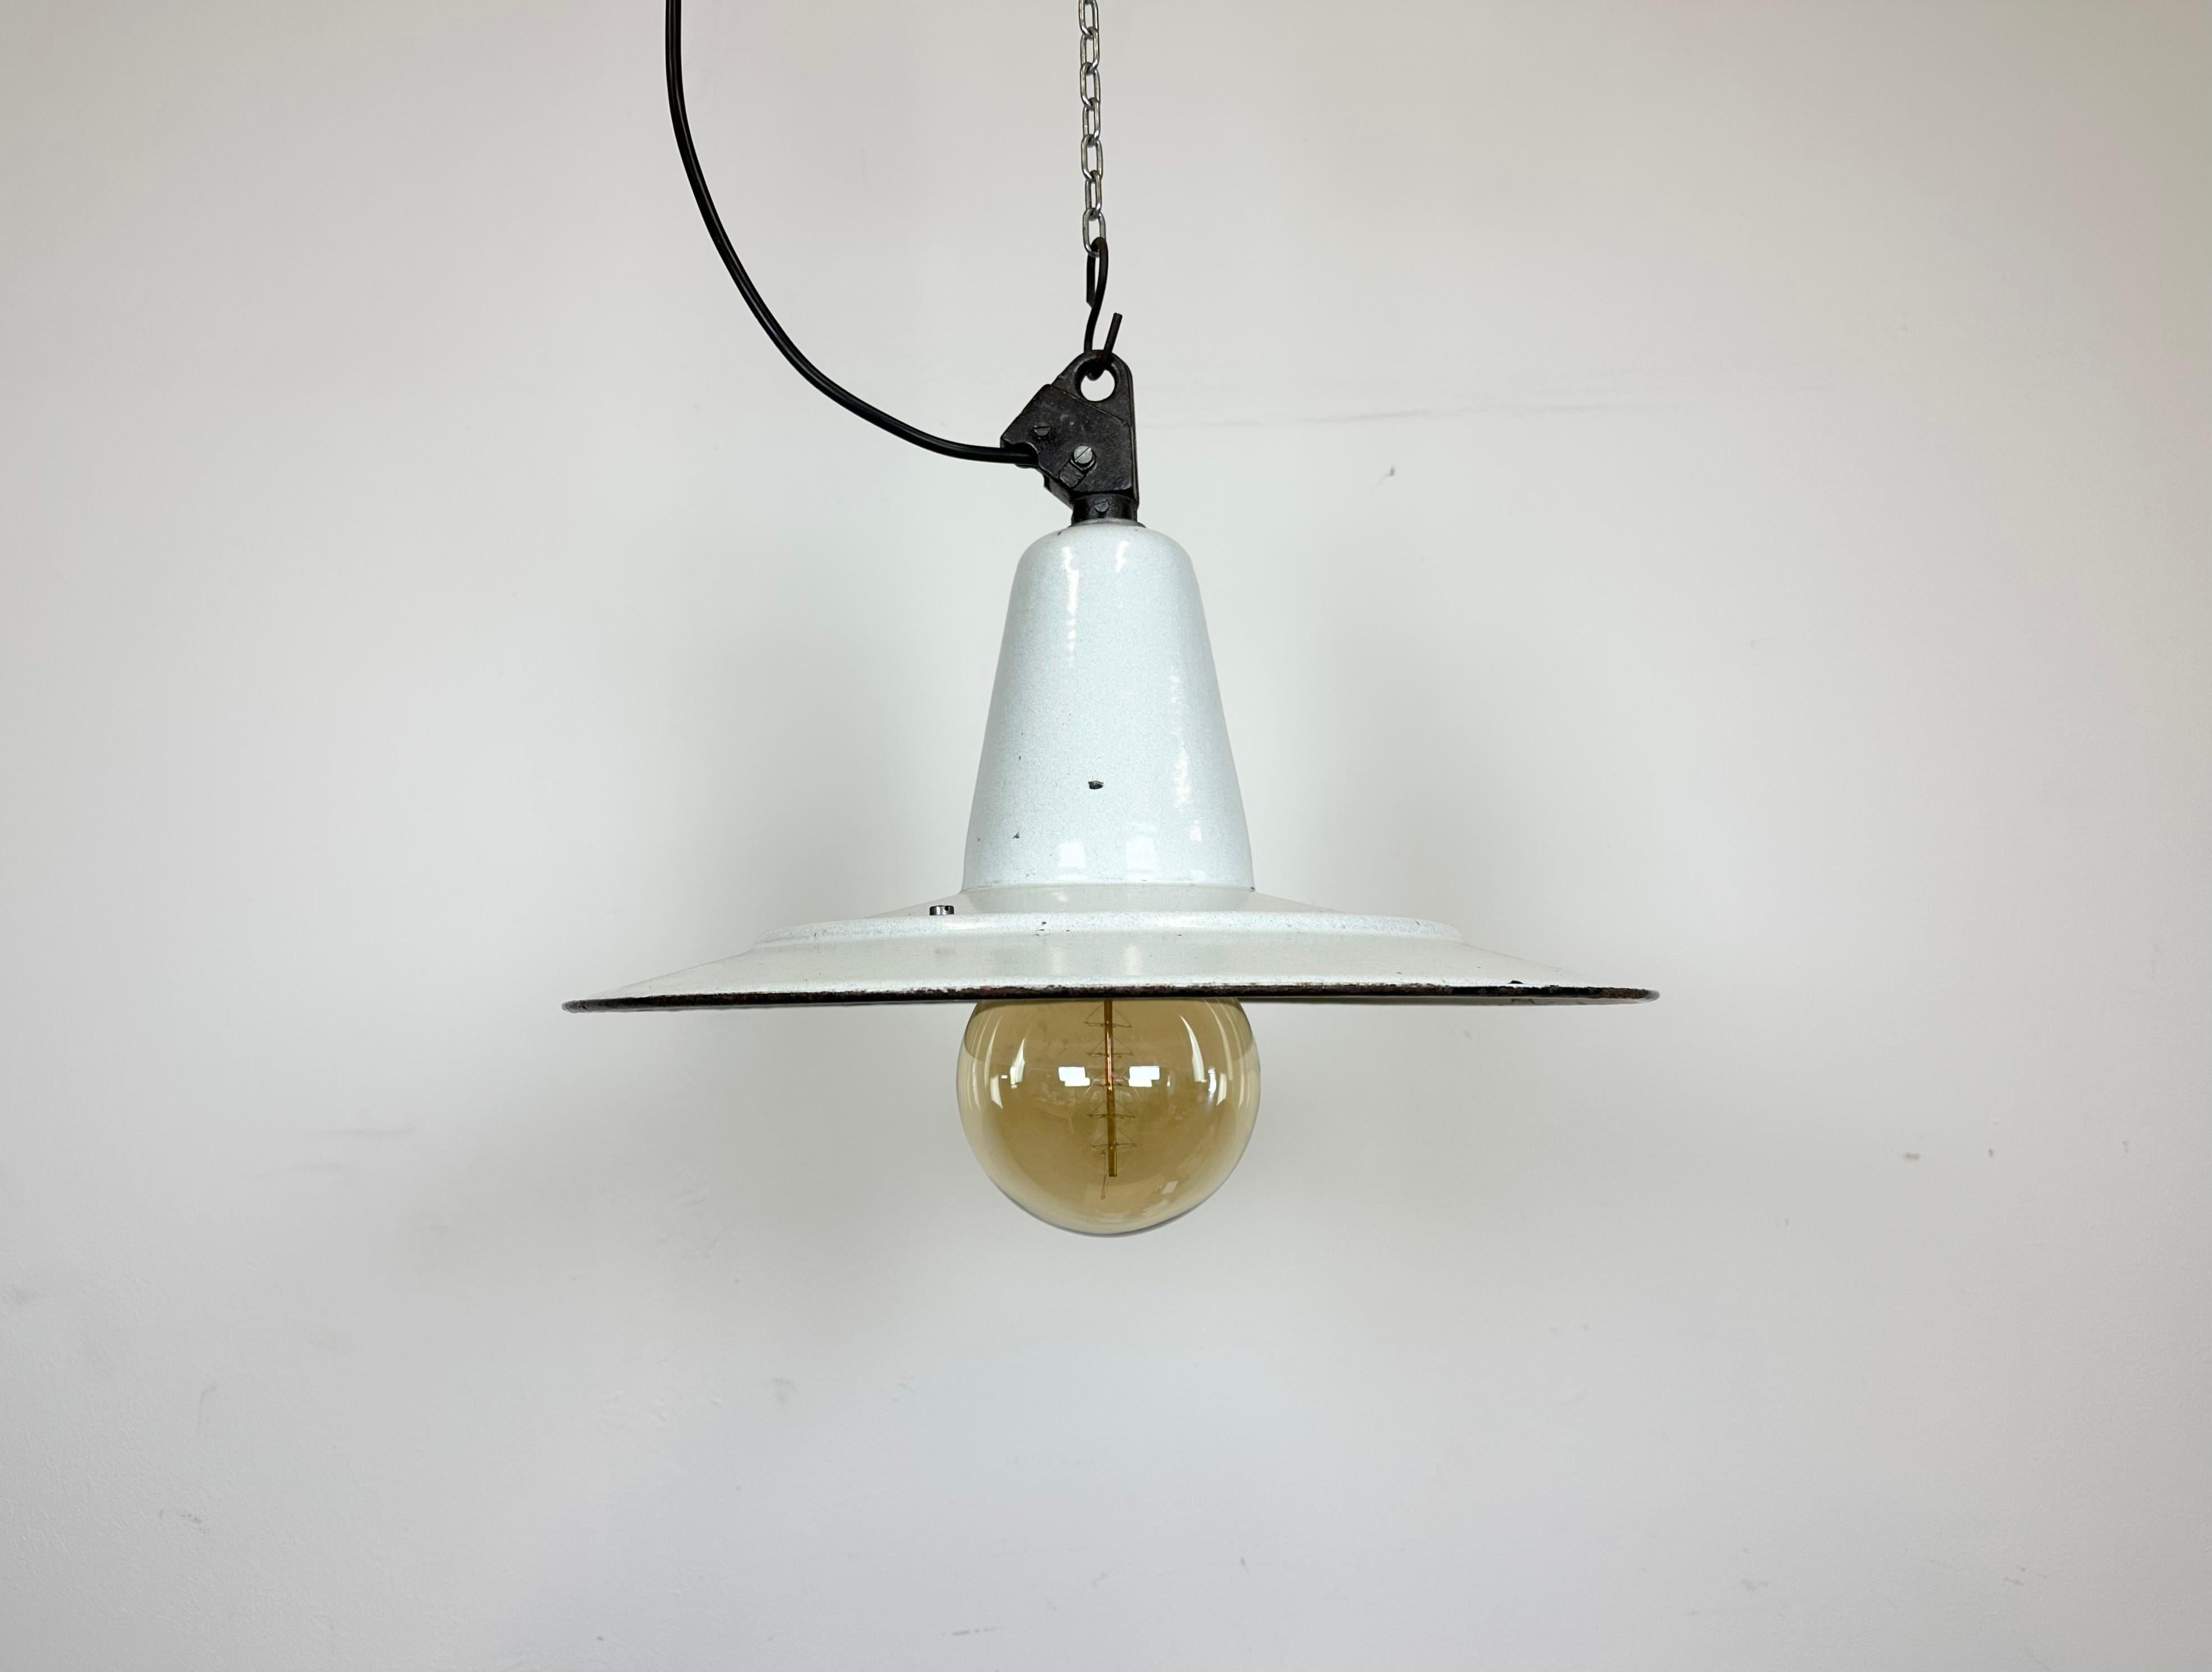 Industrial dark white (light grey) enamel pendant light made in Poland during the 1960s. White enamel inside the shade. Cast iron top. The porcelain socket requires E 27/ E 26 light bulbs. New wire. Fully functional. The weight of the lamp is 2 kg.